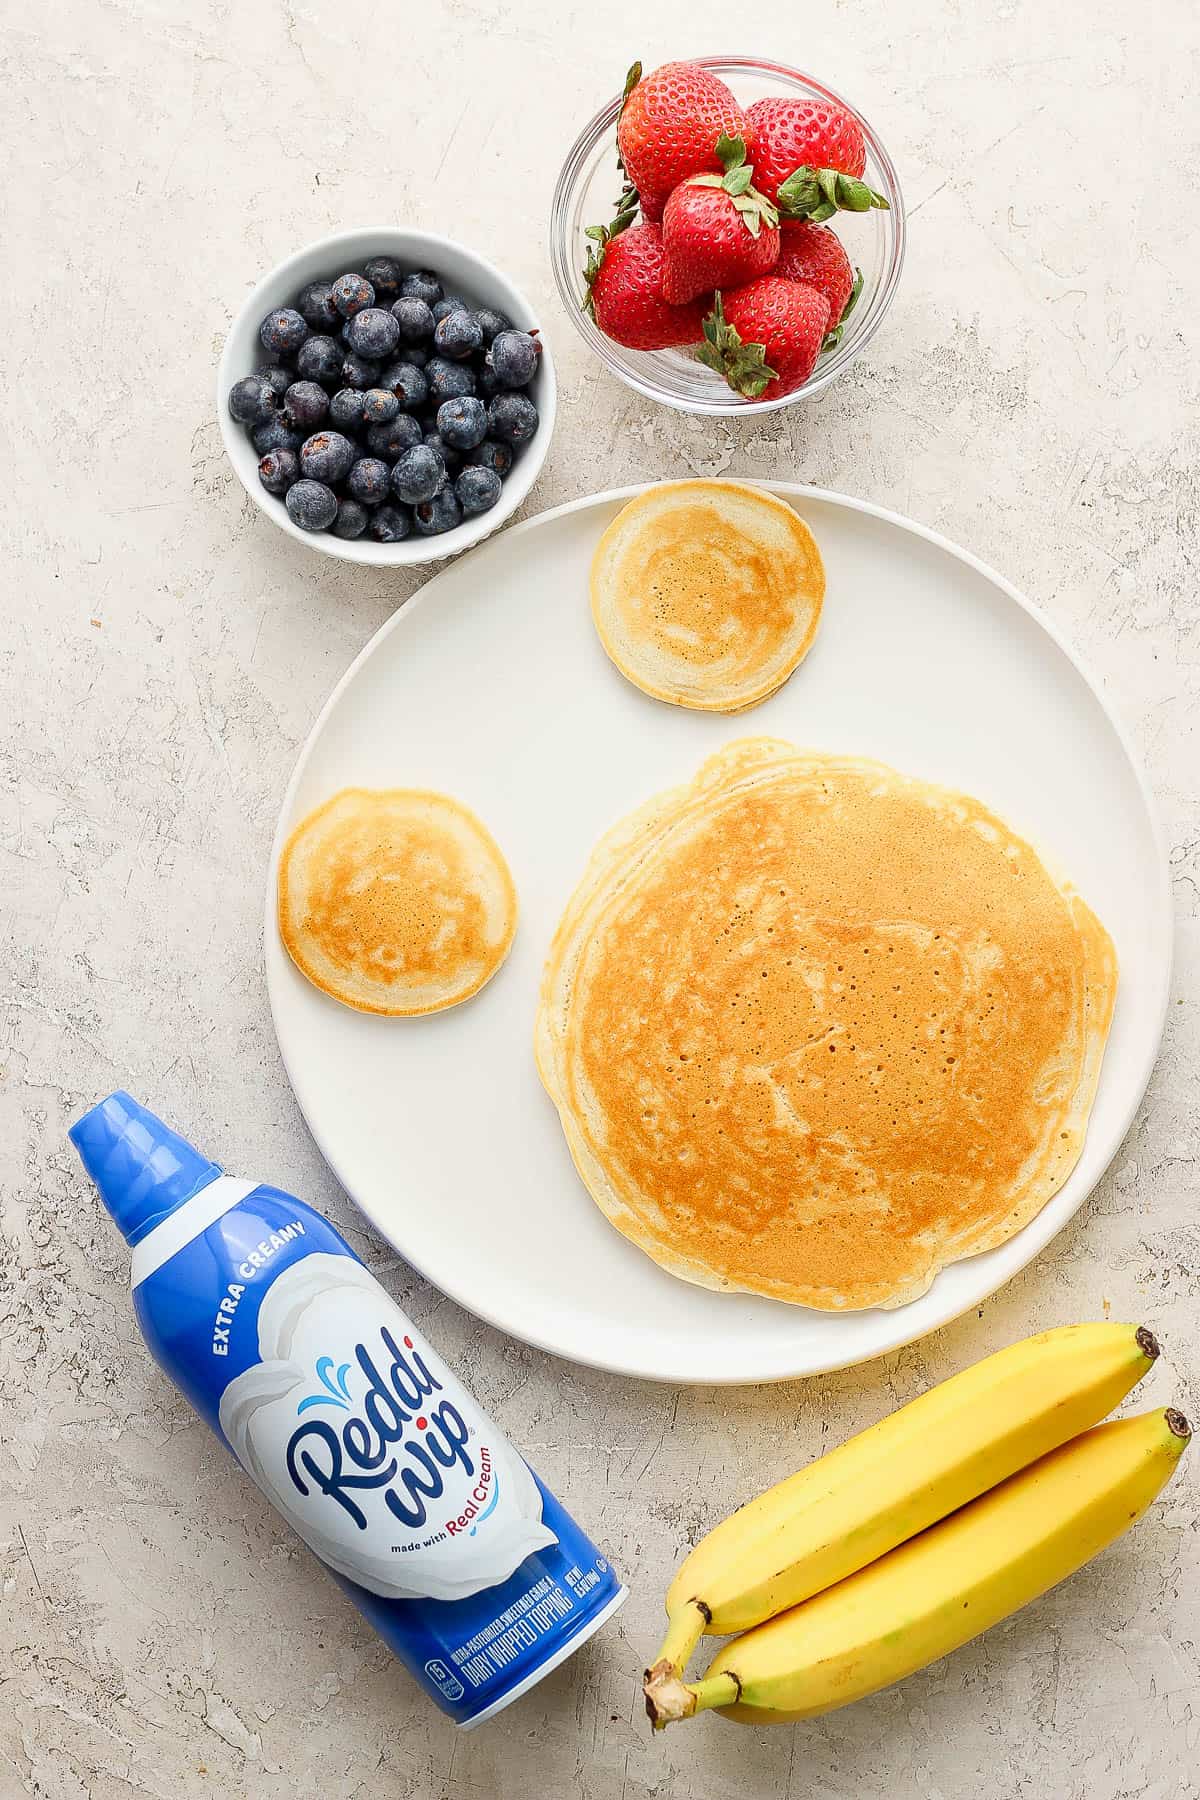 Three pancakes on a plate surrounded by fresh bananas, a can of whipped cream and bowls of berries.